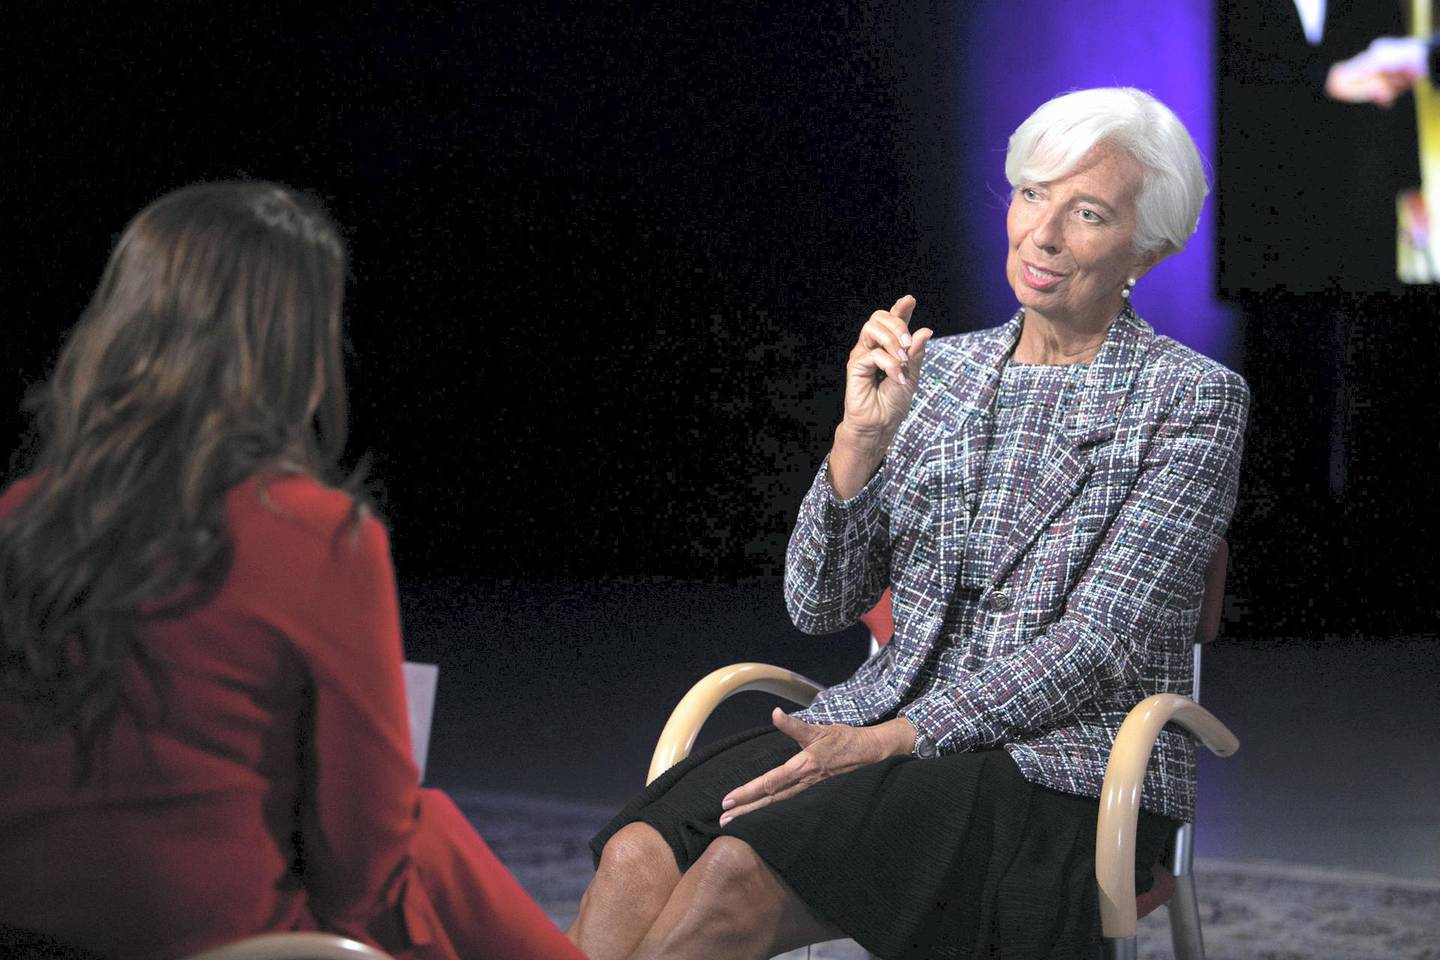 Christine Lagarde, head of the IMF interview with Mina Al-Oraibi at IMF HQ in Washington. The National